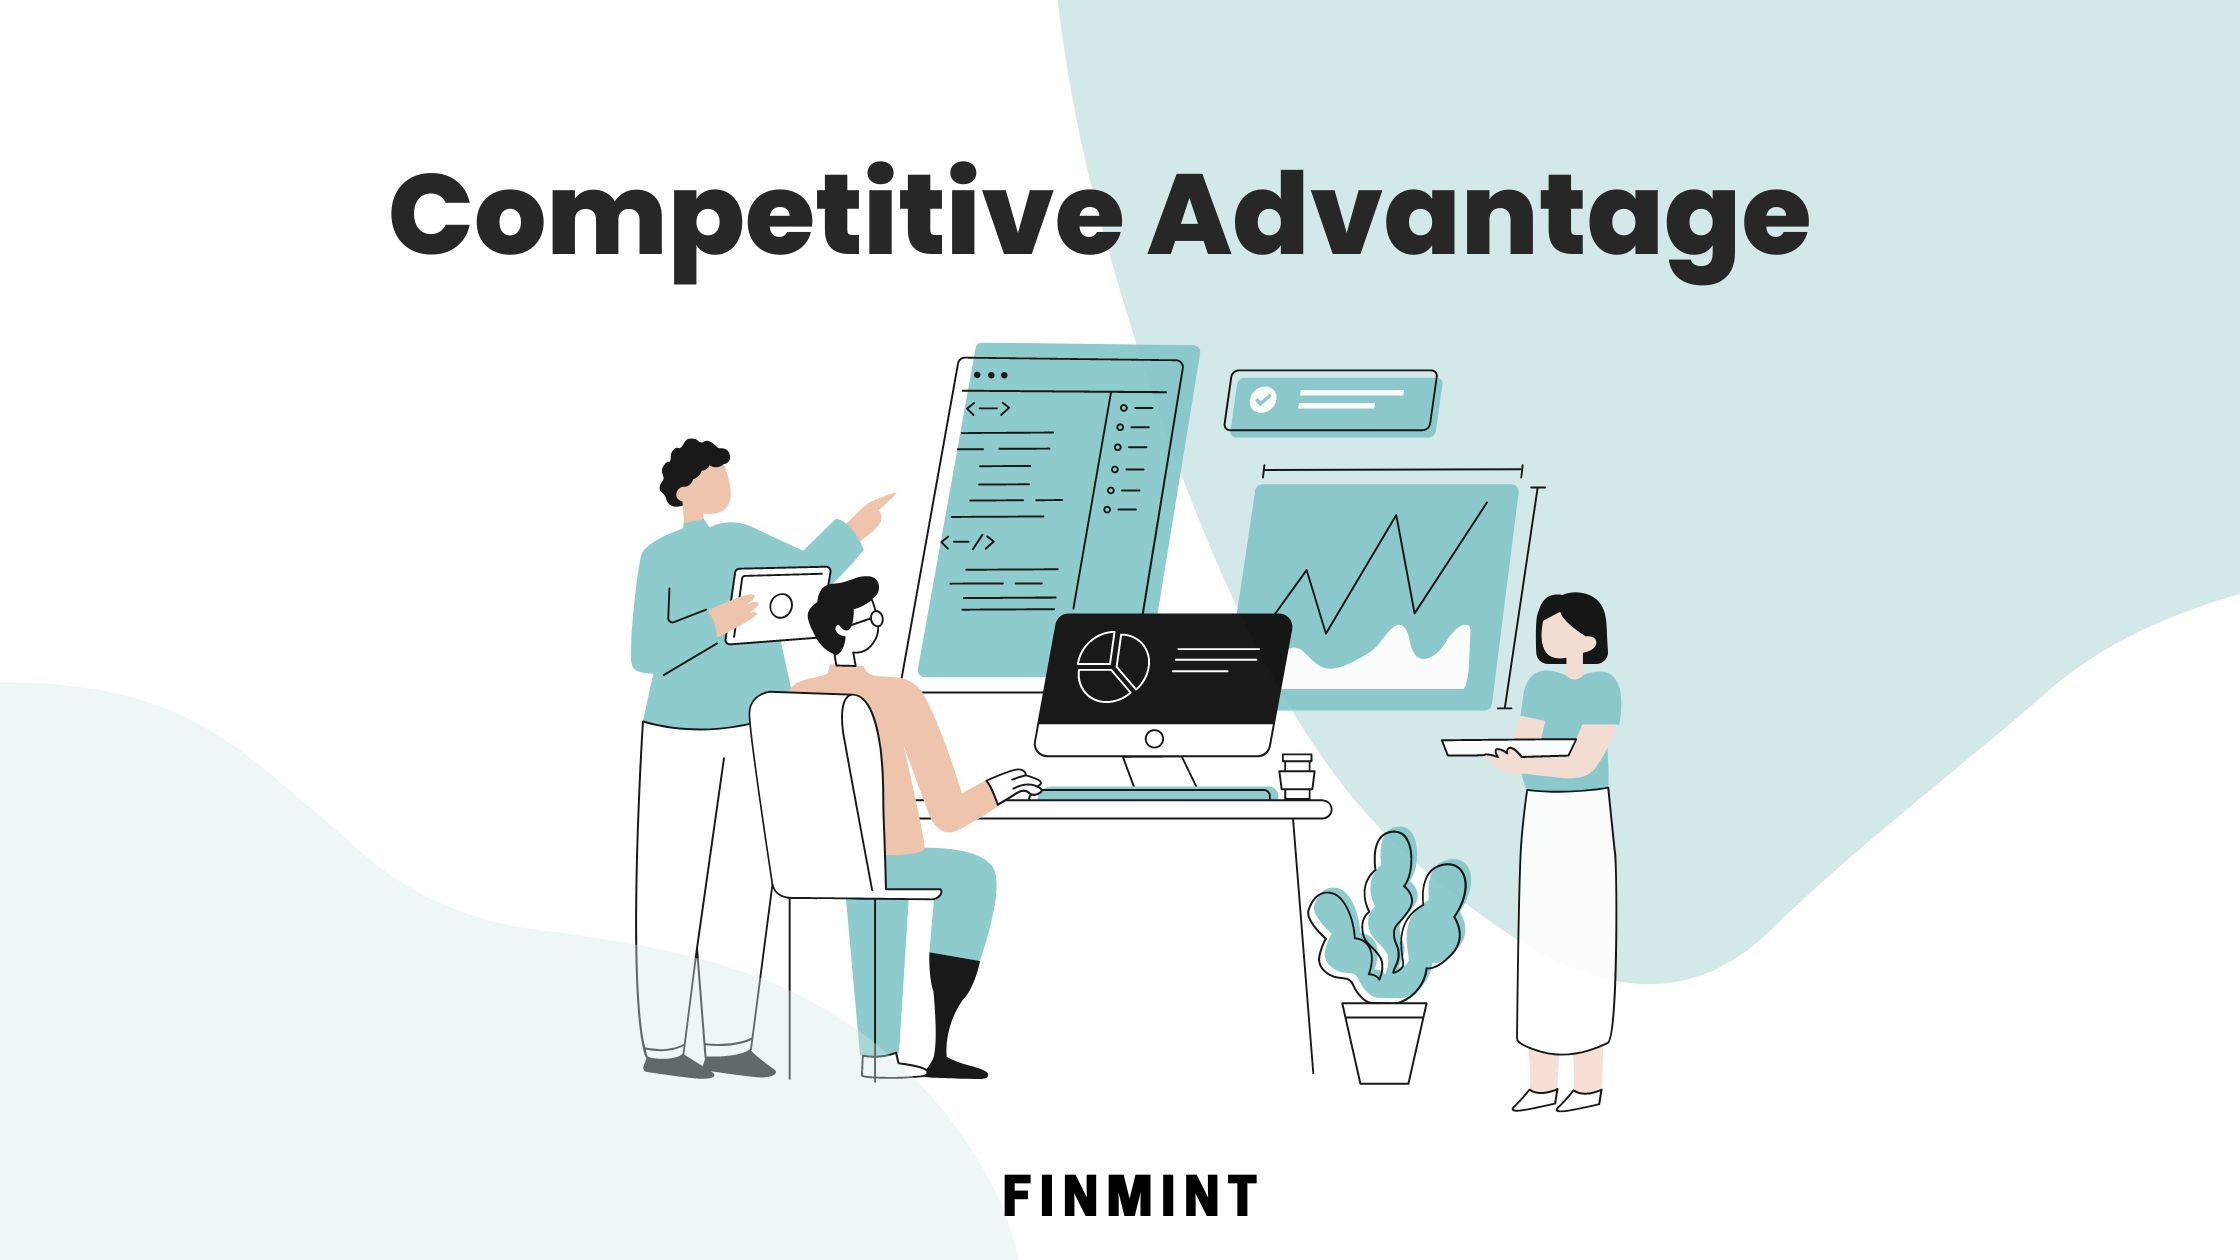 Competitive Advantage: An Integral Part of Investment Analysis